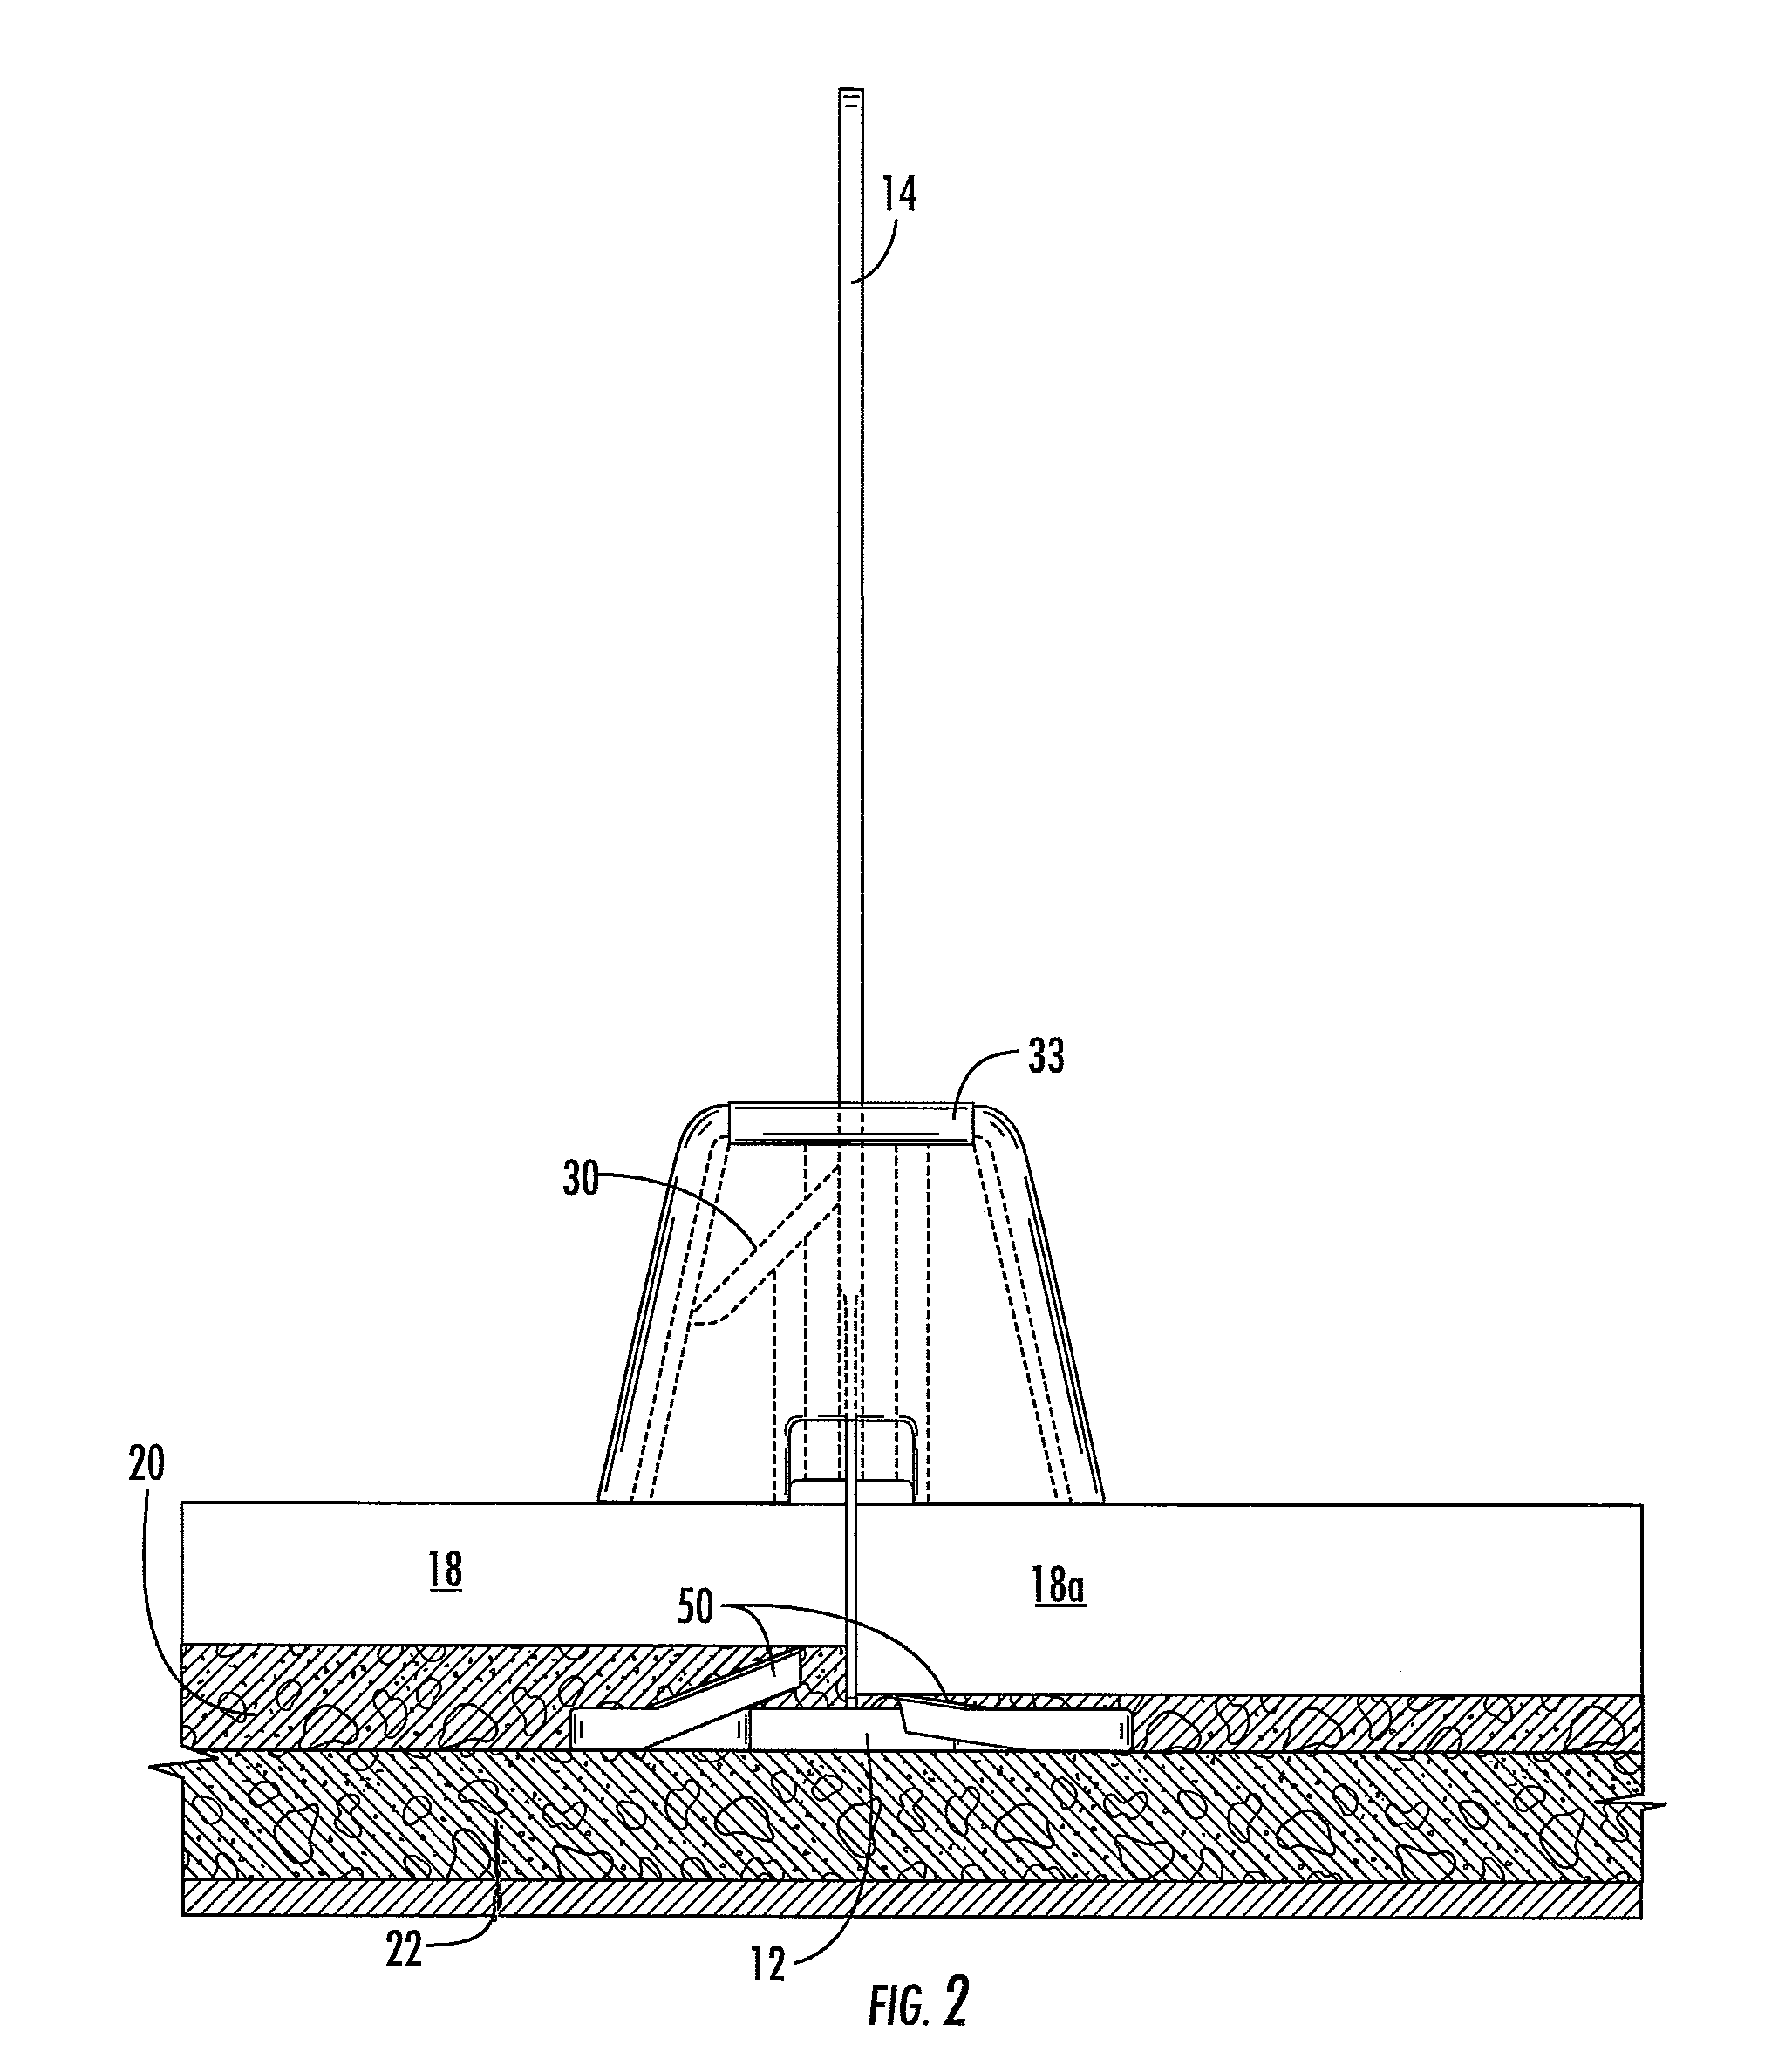 Tile alignment and leveling device